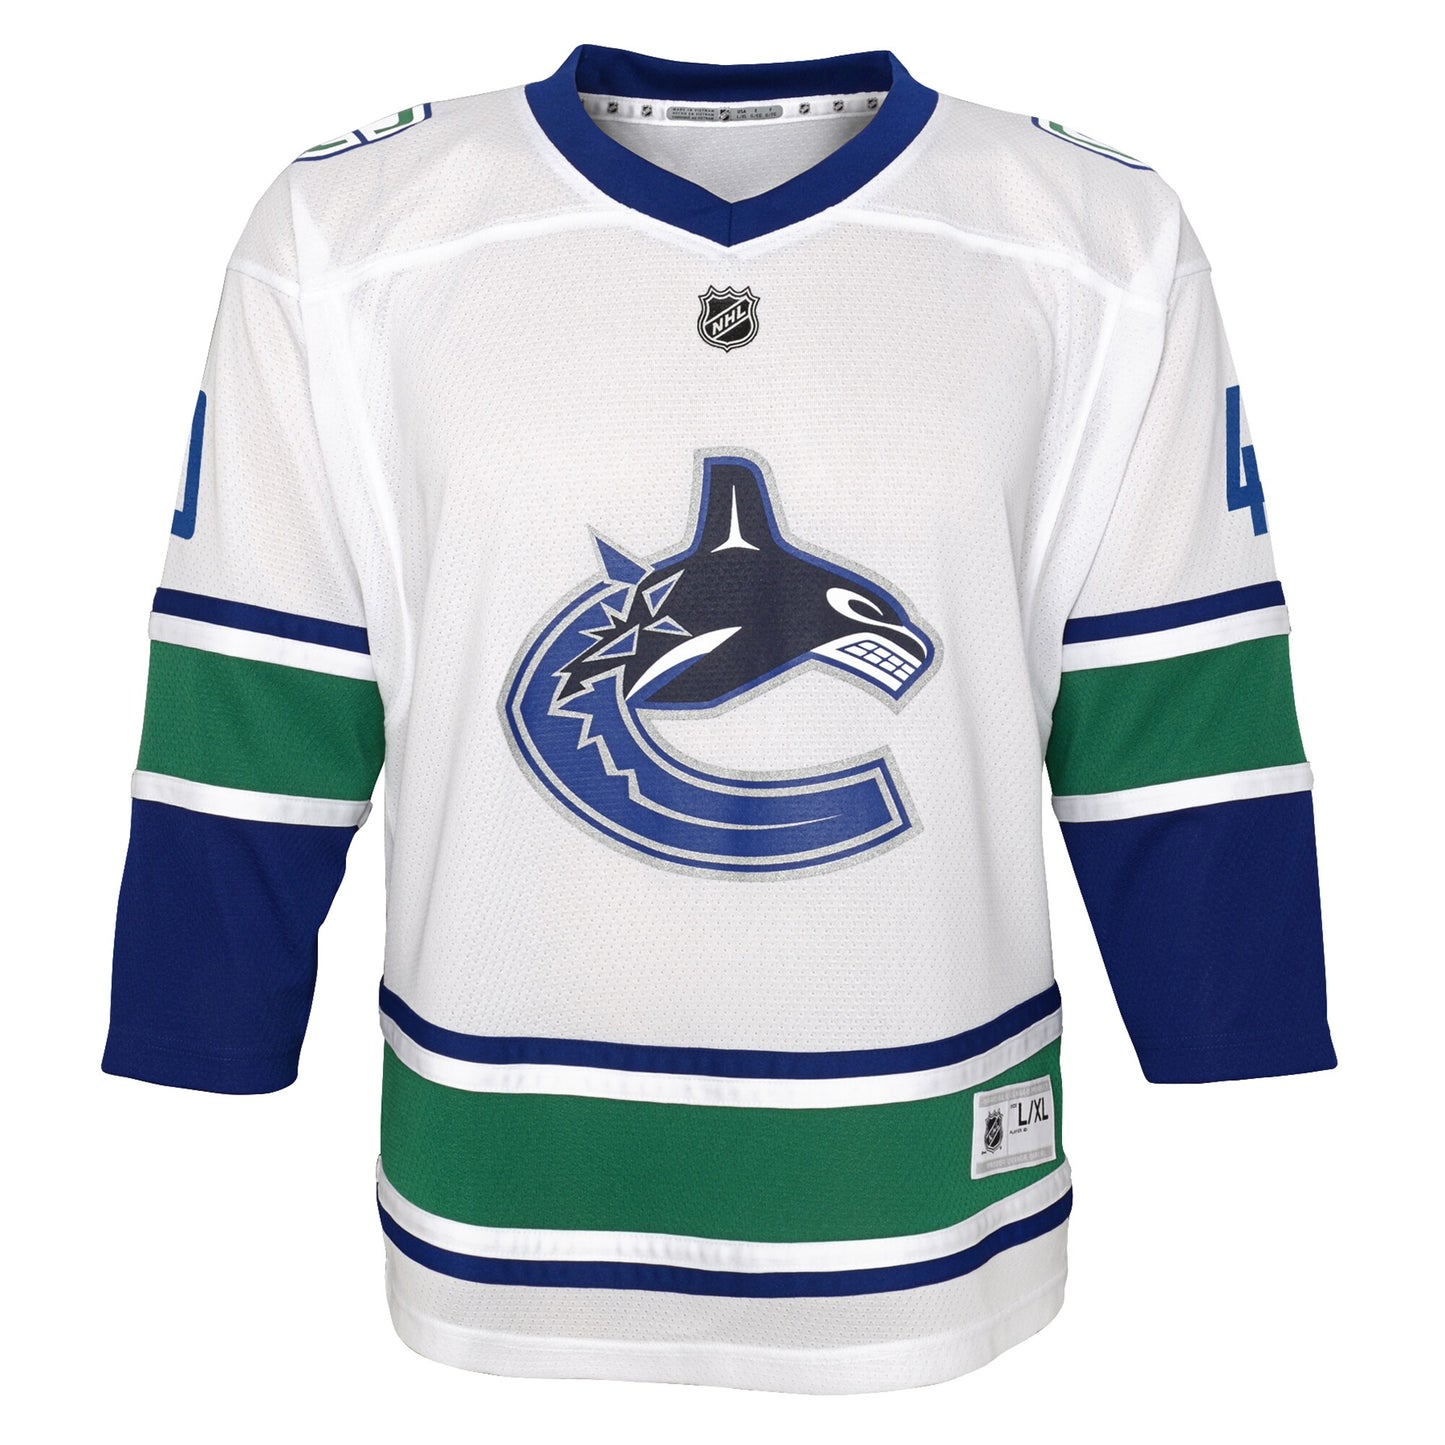 Elias Pettersson Vancouver Canucks Youth 2019/20 Away Replica Player Jersey - White